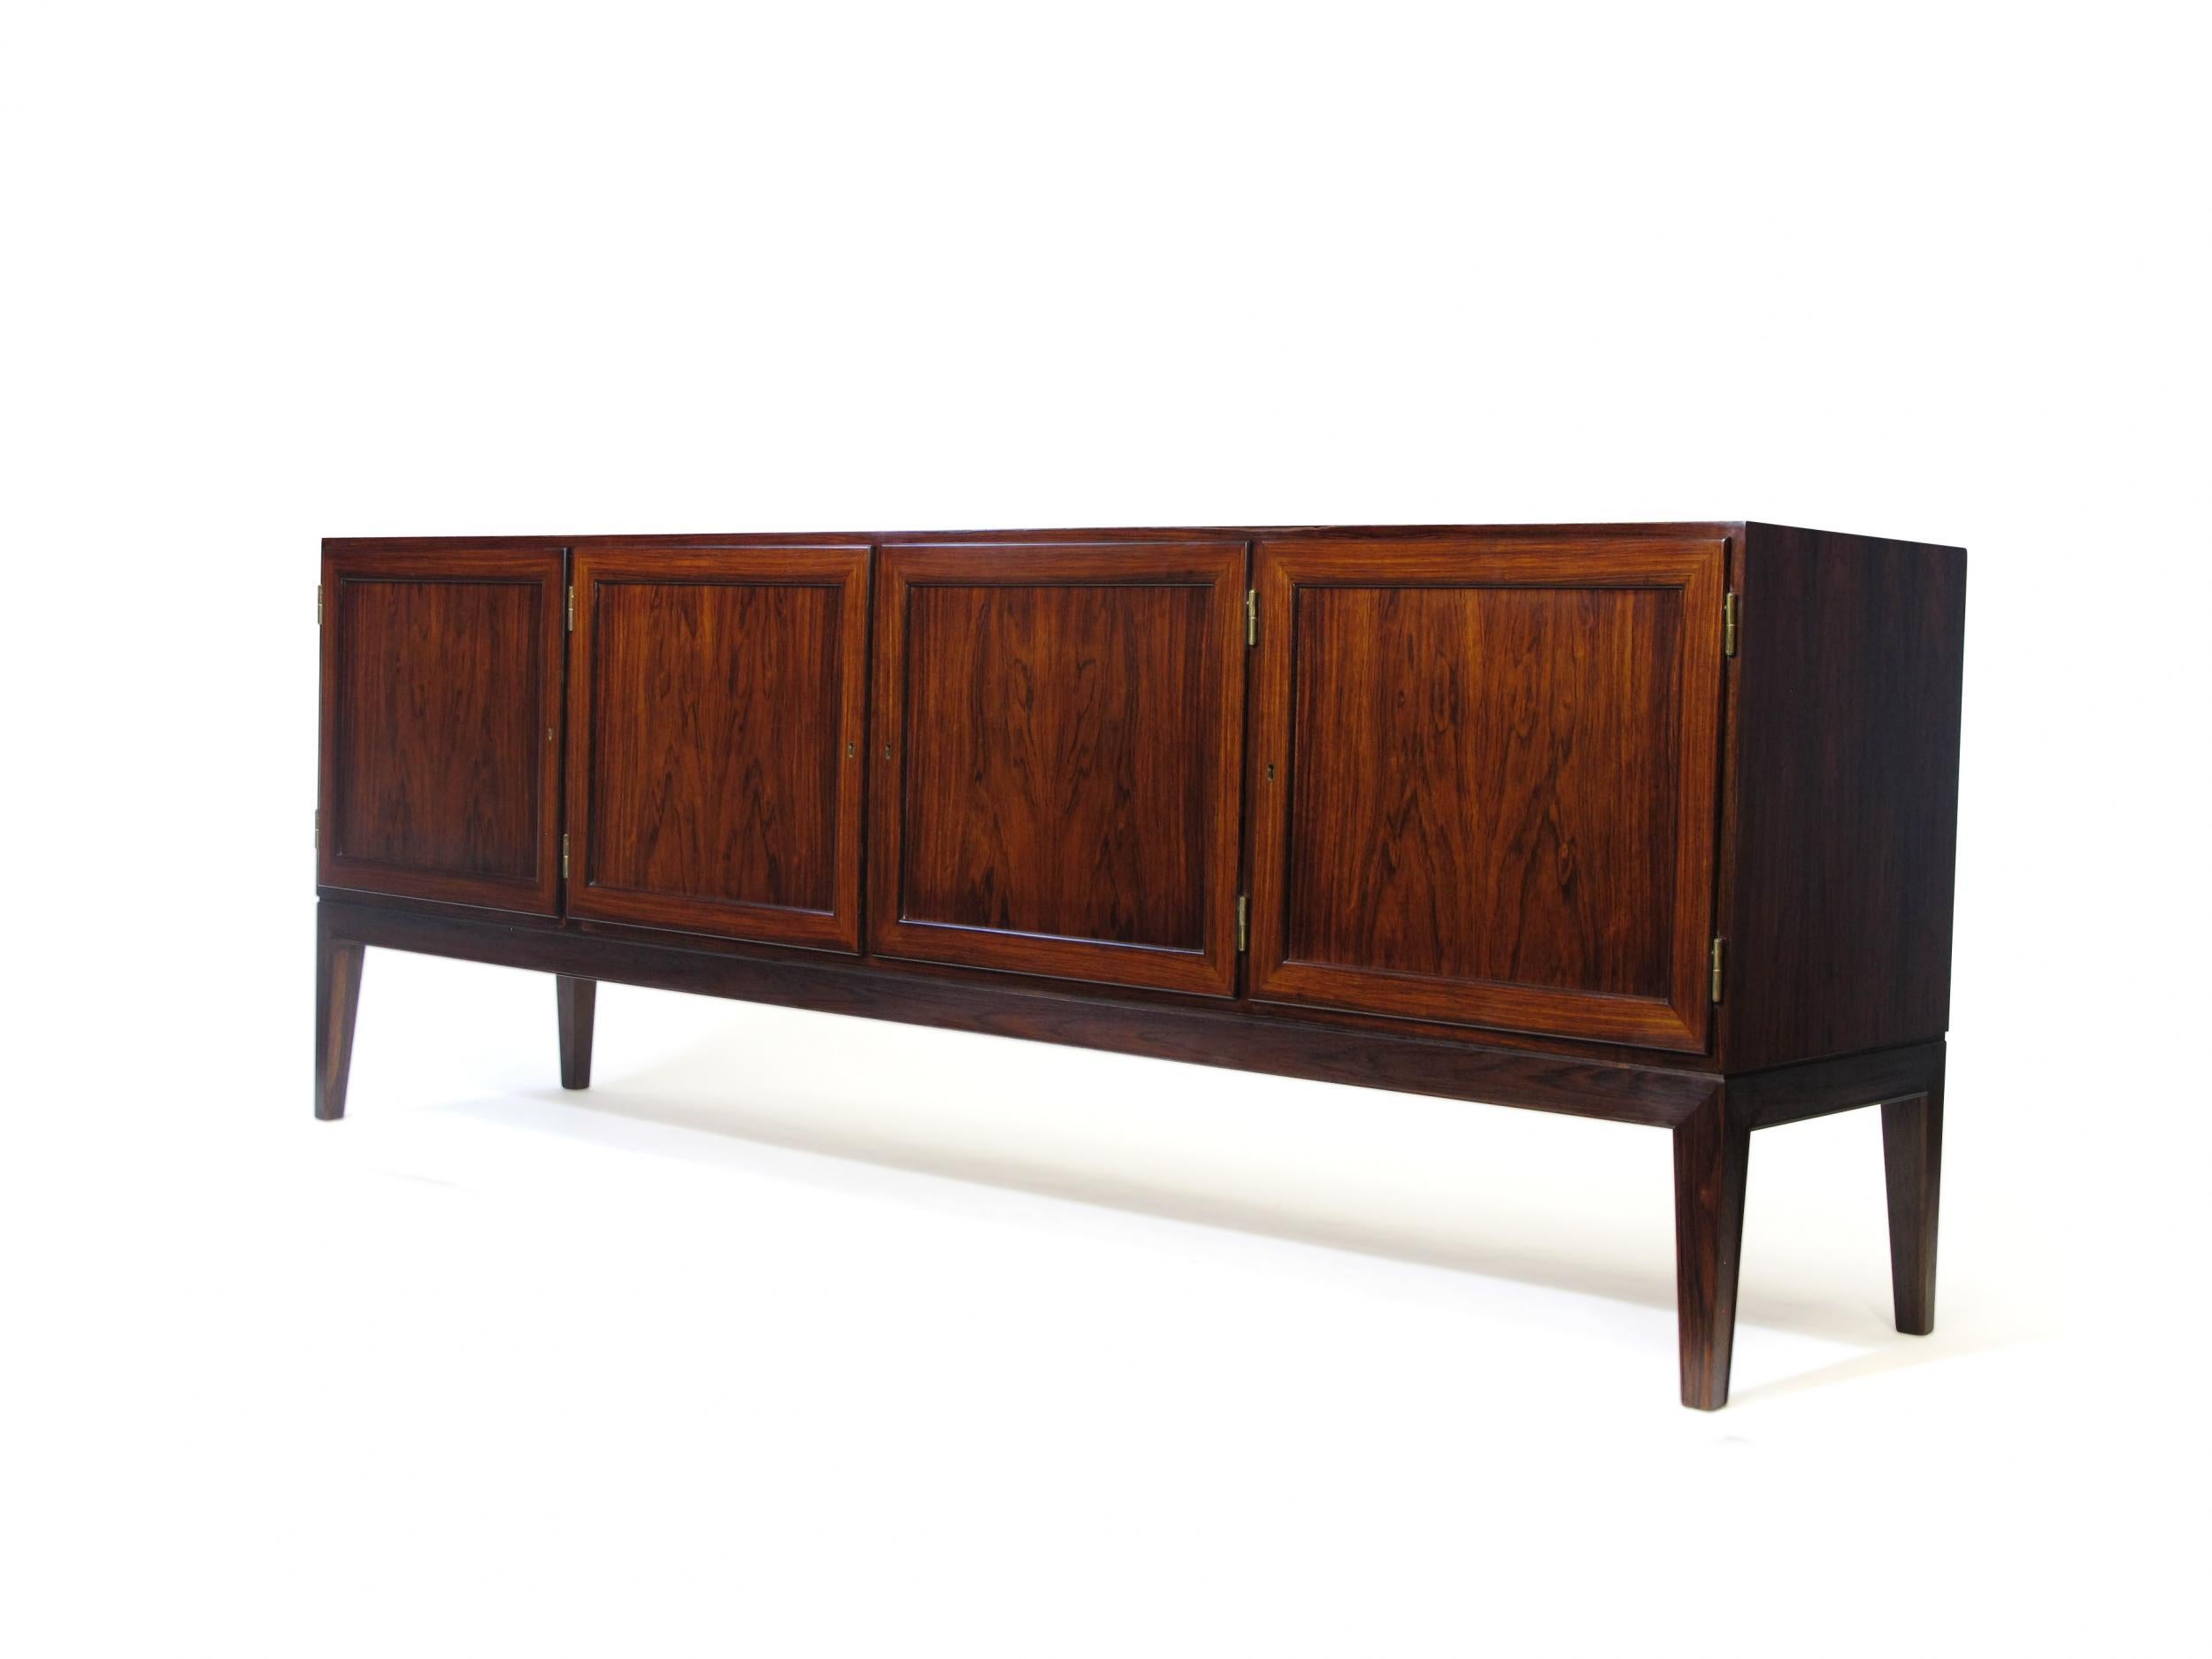 Oiled Ole Wanscher Rosewood Sideboard